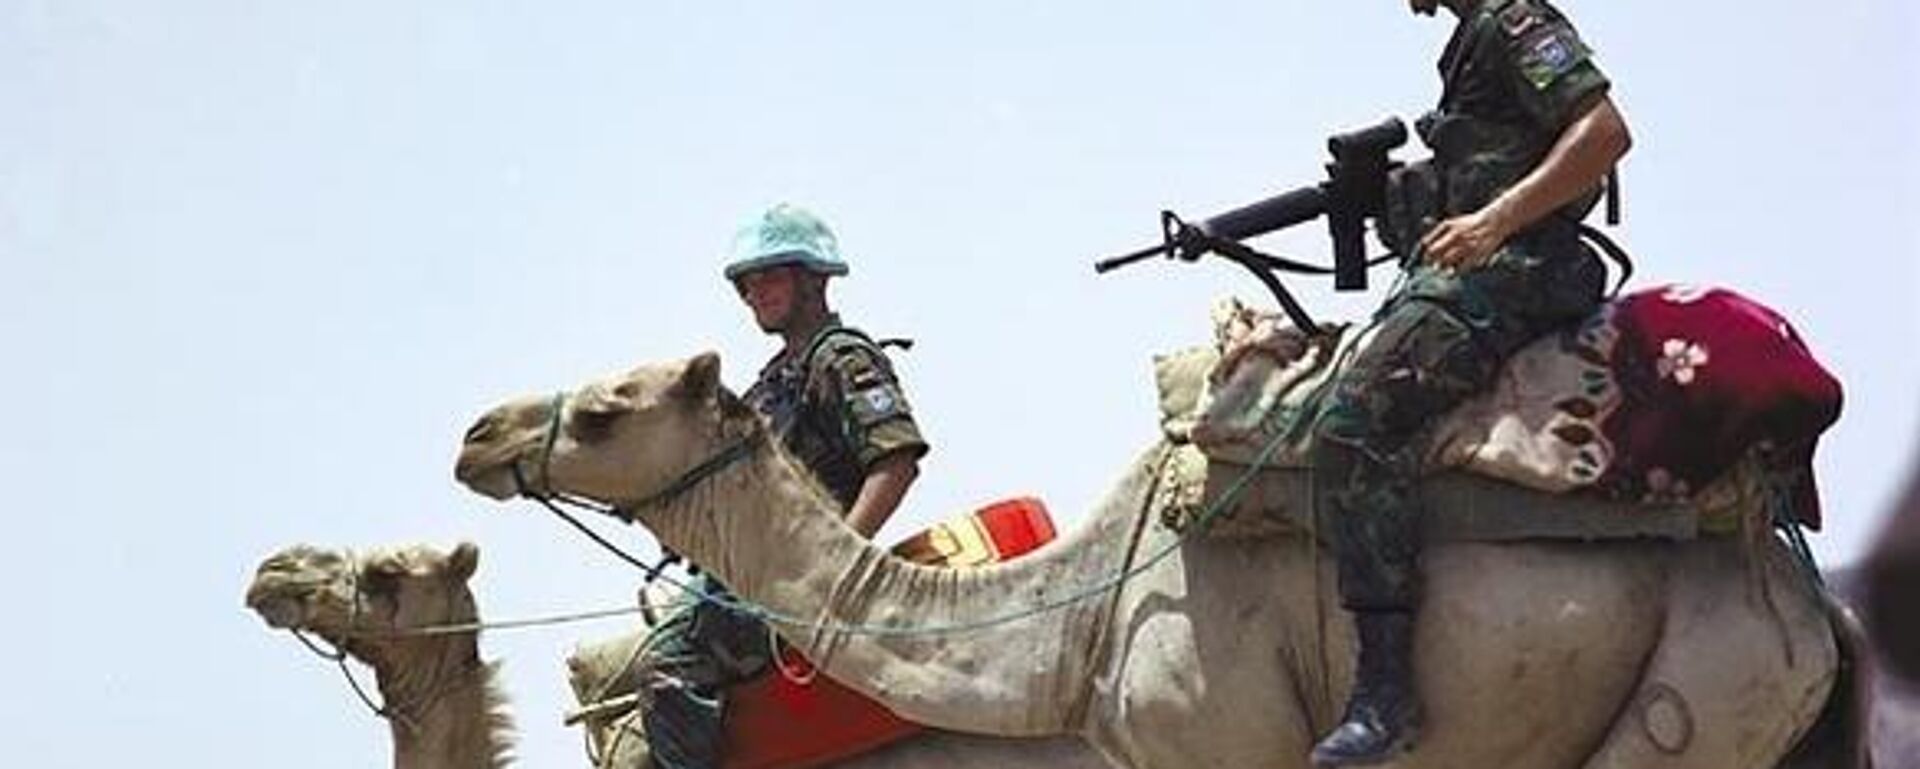 UN soldiers on camel-back in Eritrea during the 2000-2008 peacekeeping mission monitoring the border between Eritrea and Ethiopia. - Sputnik International, 1920, 18.10.2022